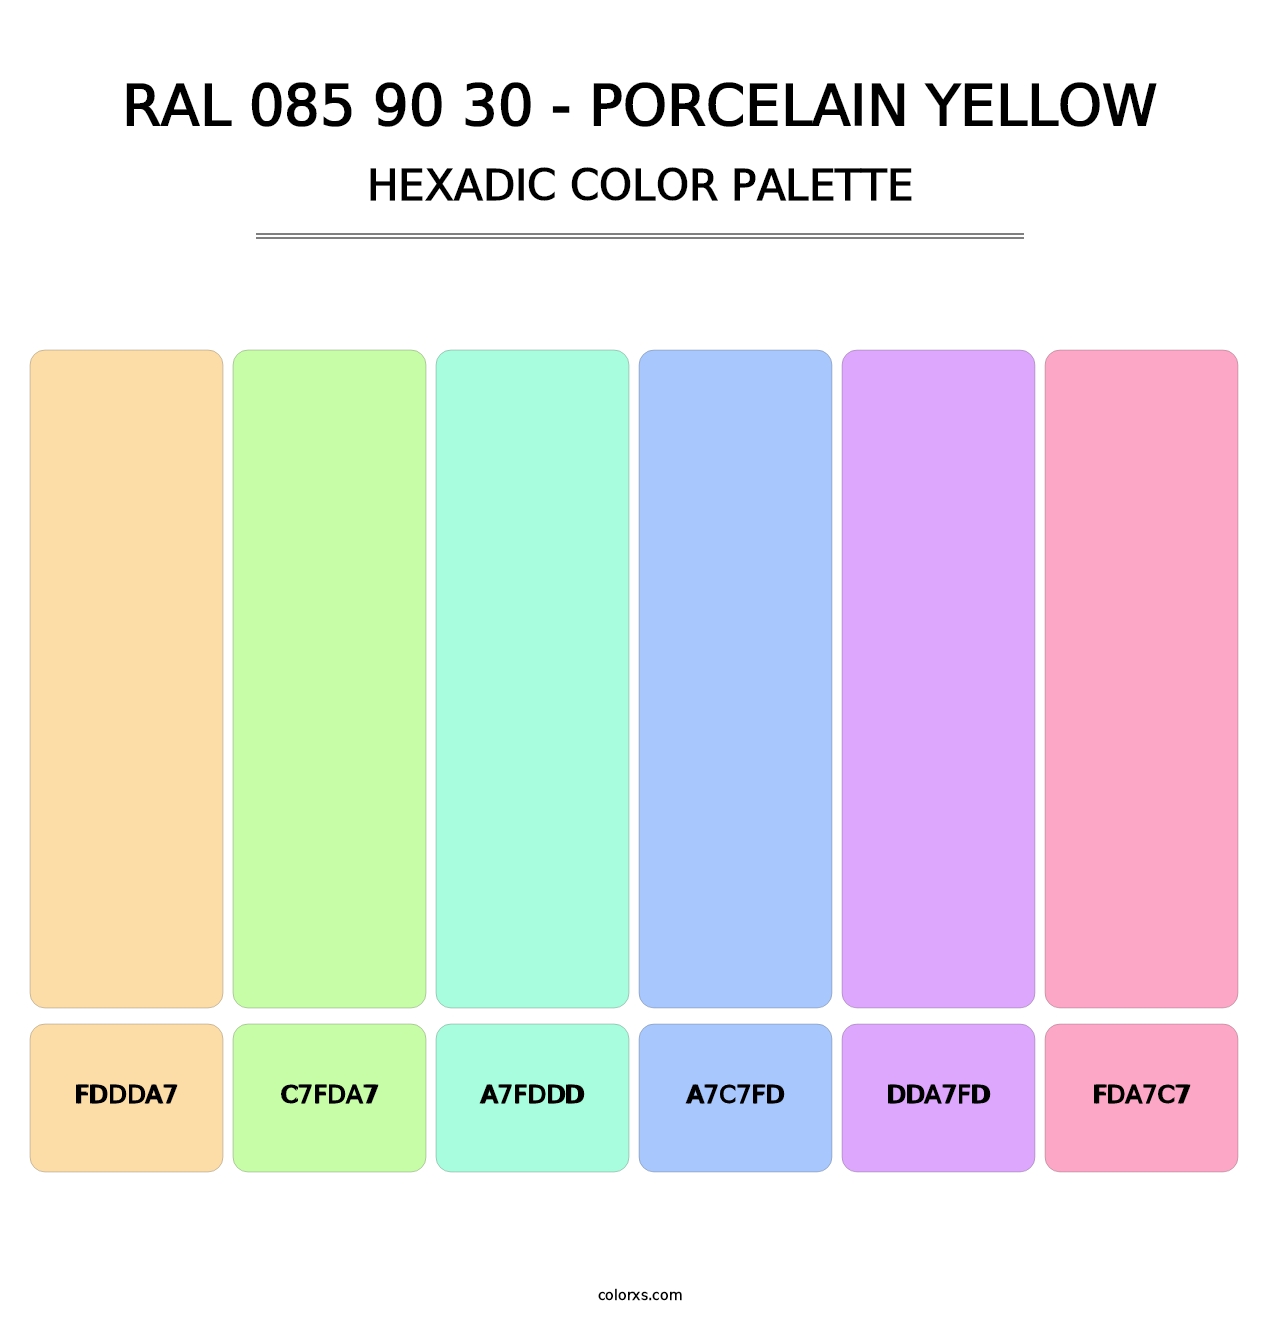 RAL 085 90 30 - Porcelain Yellow - Hexadic Color Palette